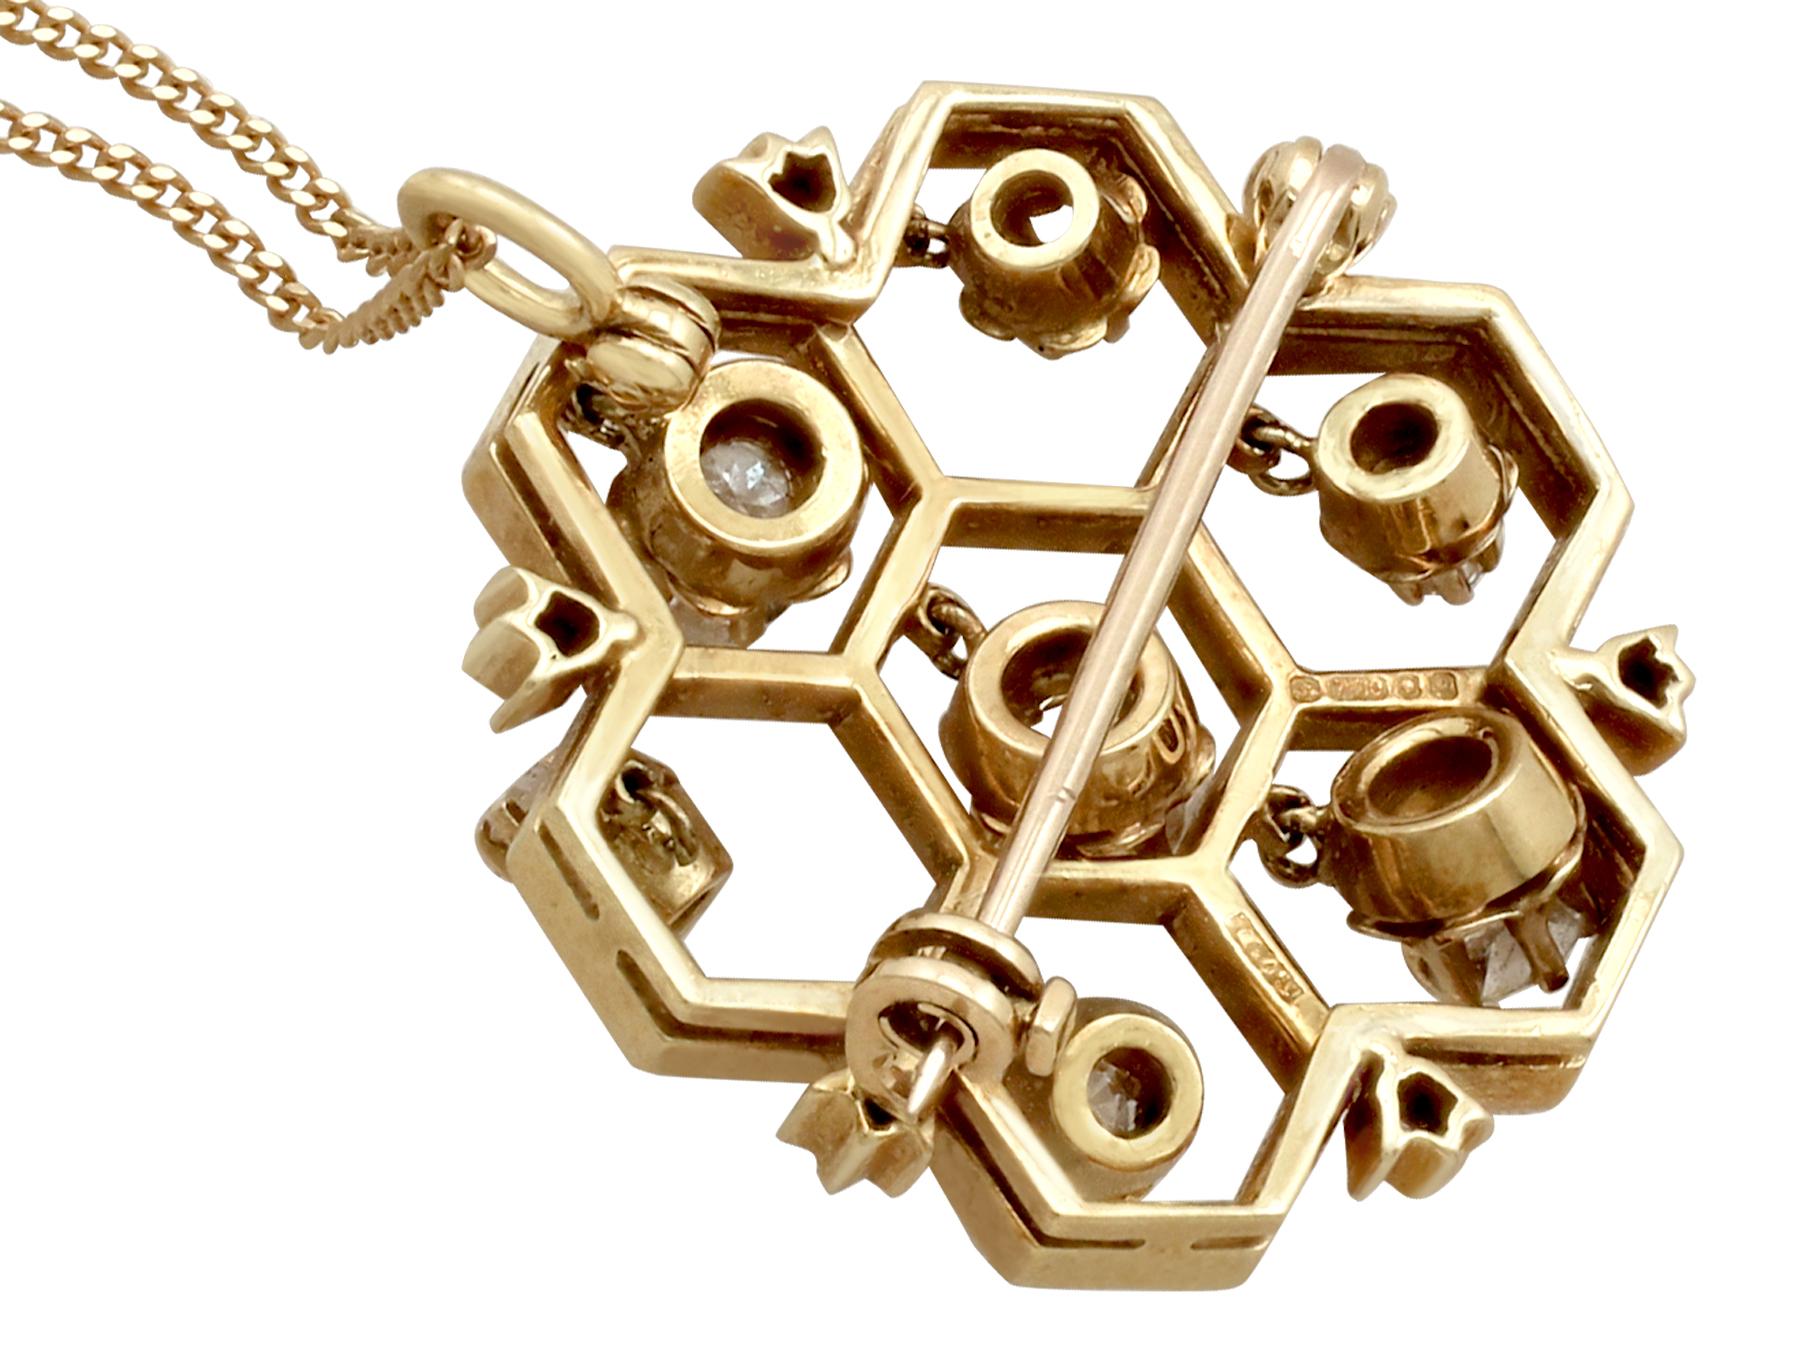 1.29 Carat Diamond and Yellow Gold Honeycomb Pendant / Brooch For Sale 1